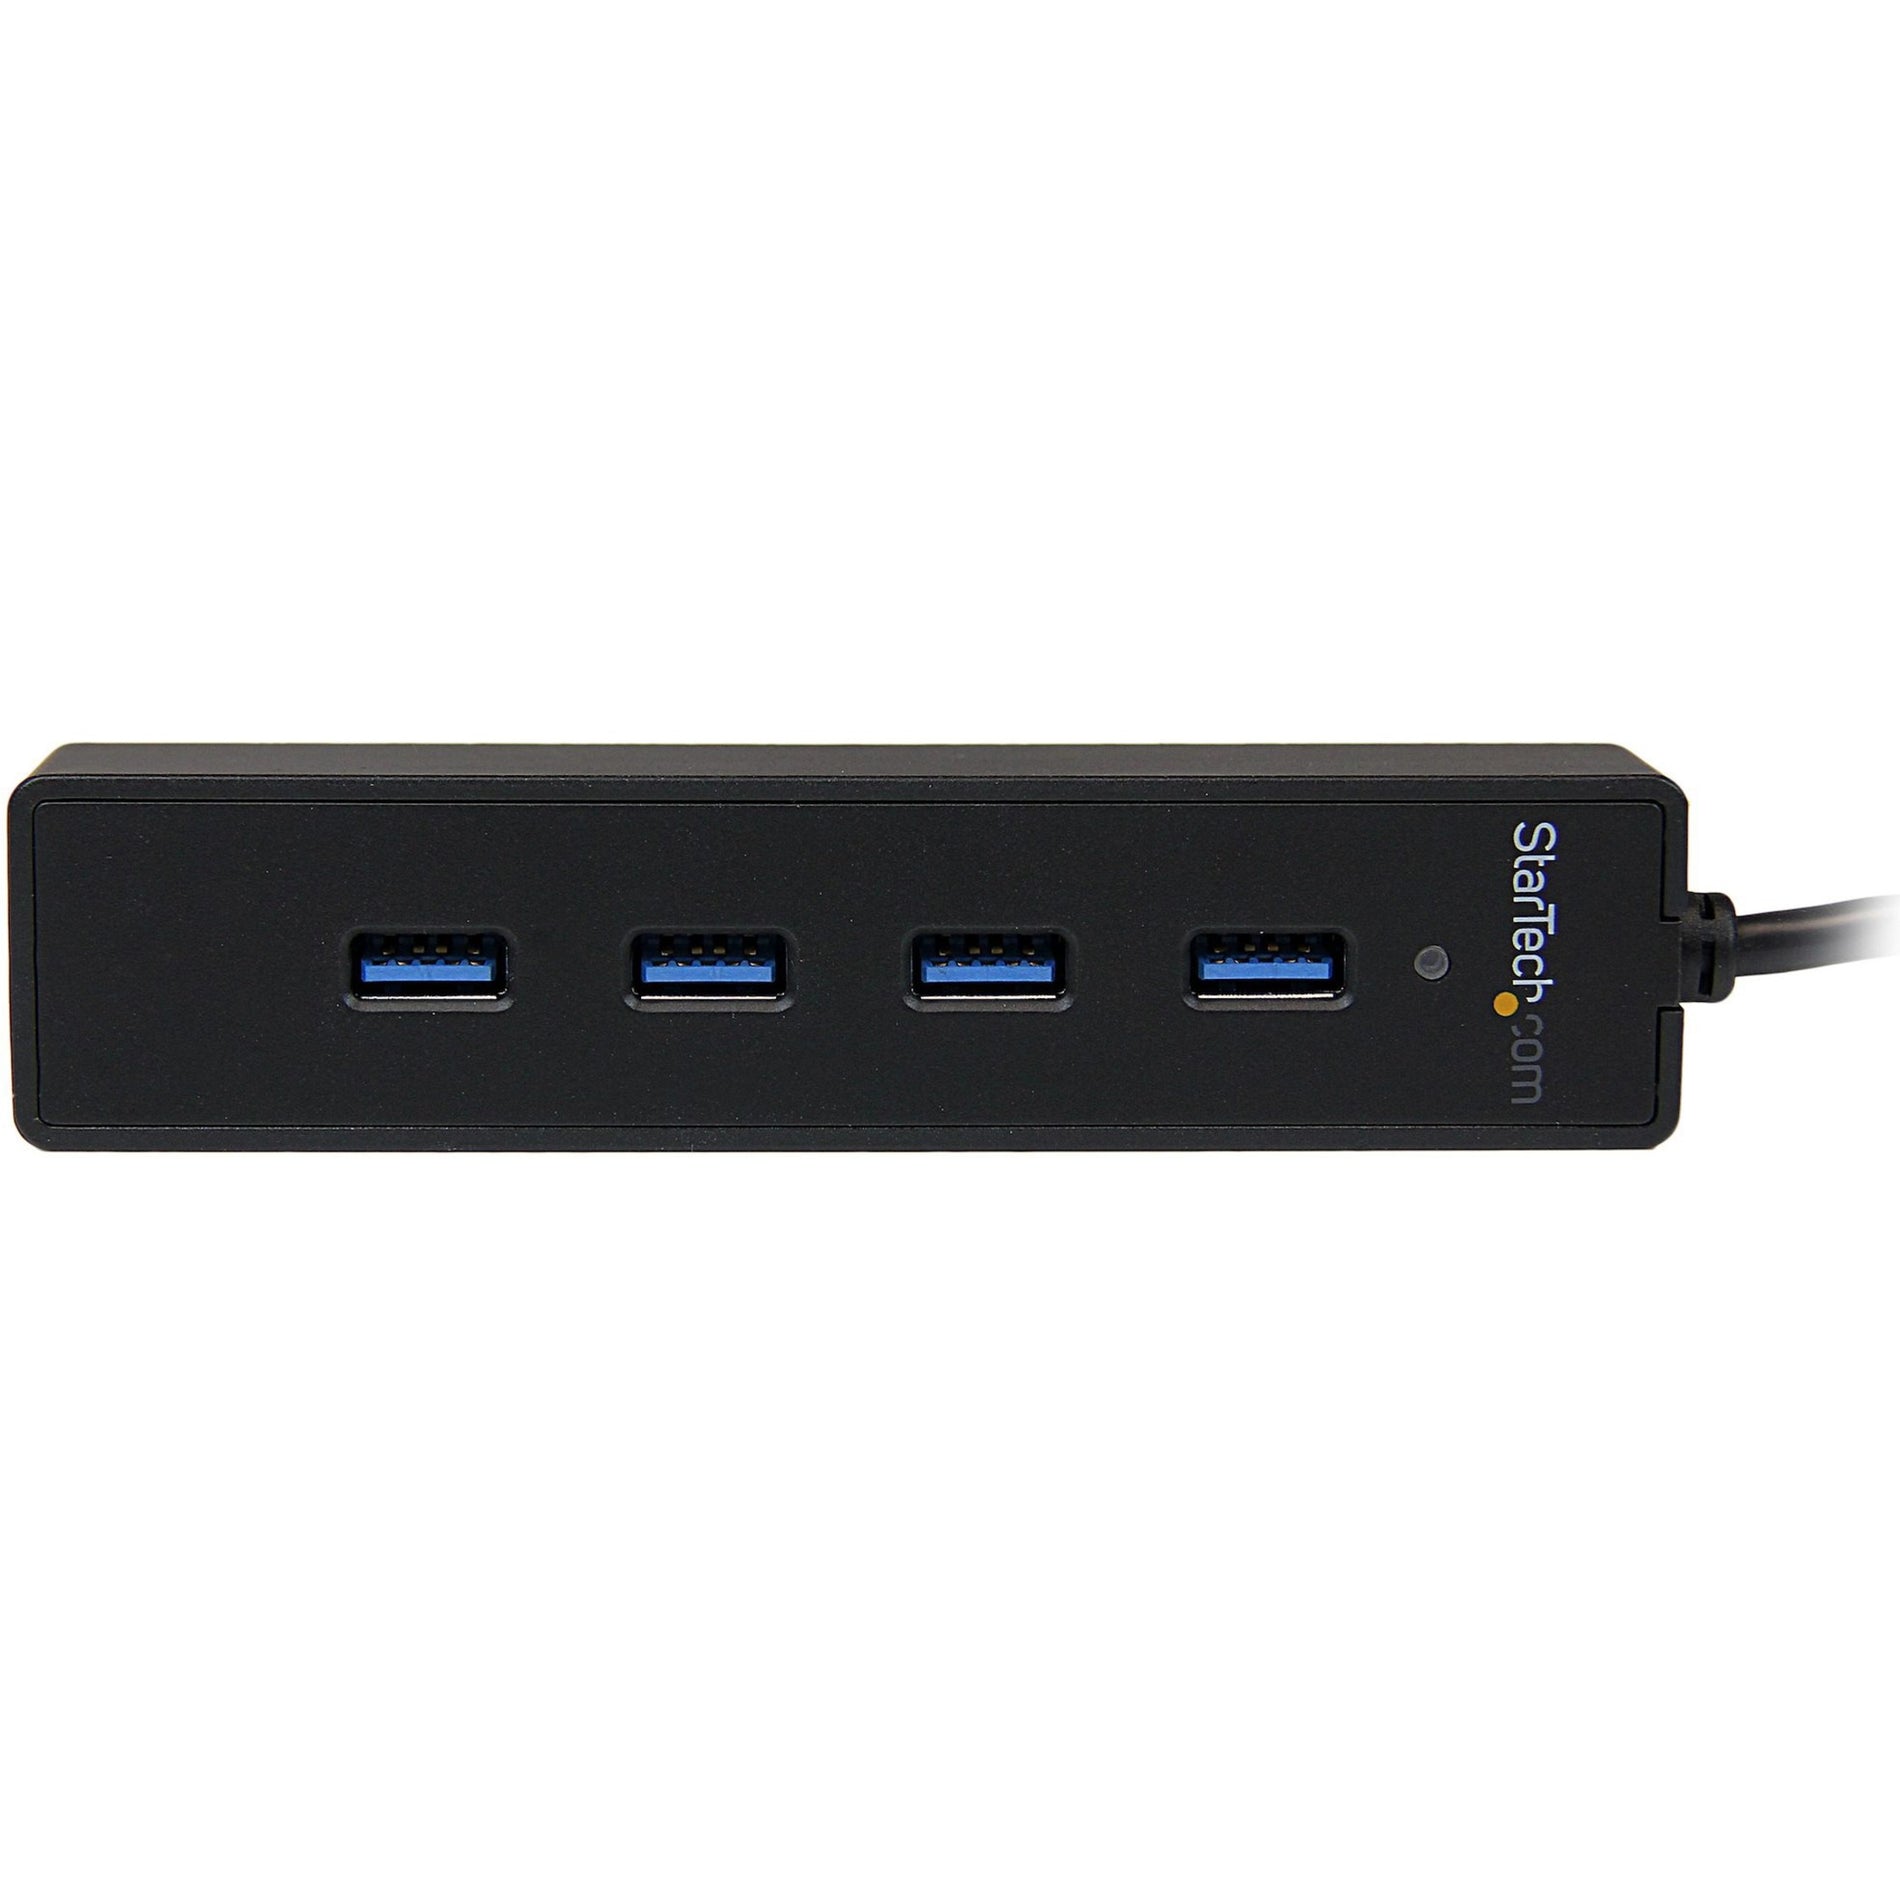 StarTech.com ST4300PBU3 4 Port Portable SuperSpeed USB 3.0 Hub with Built-in Cable, Expand Your USB Connectivity